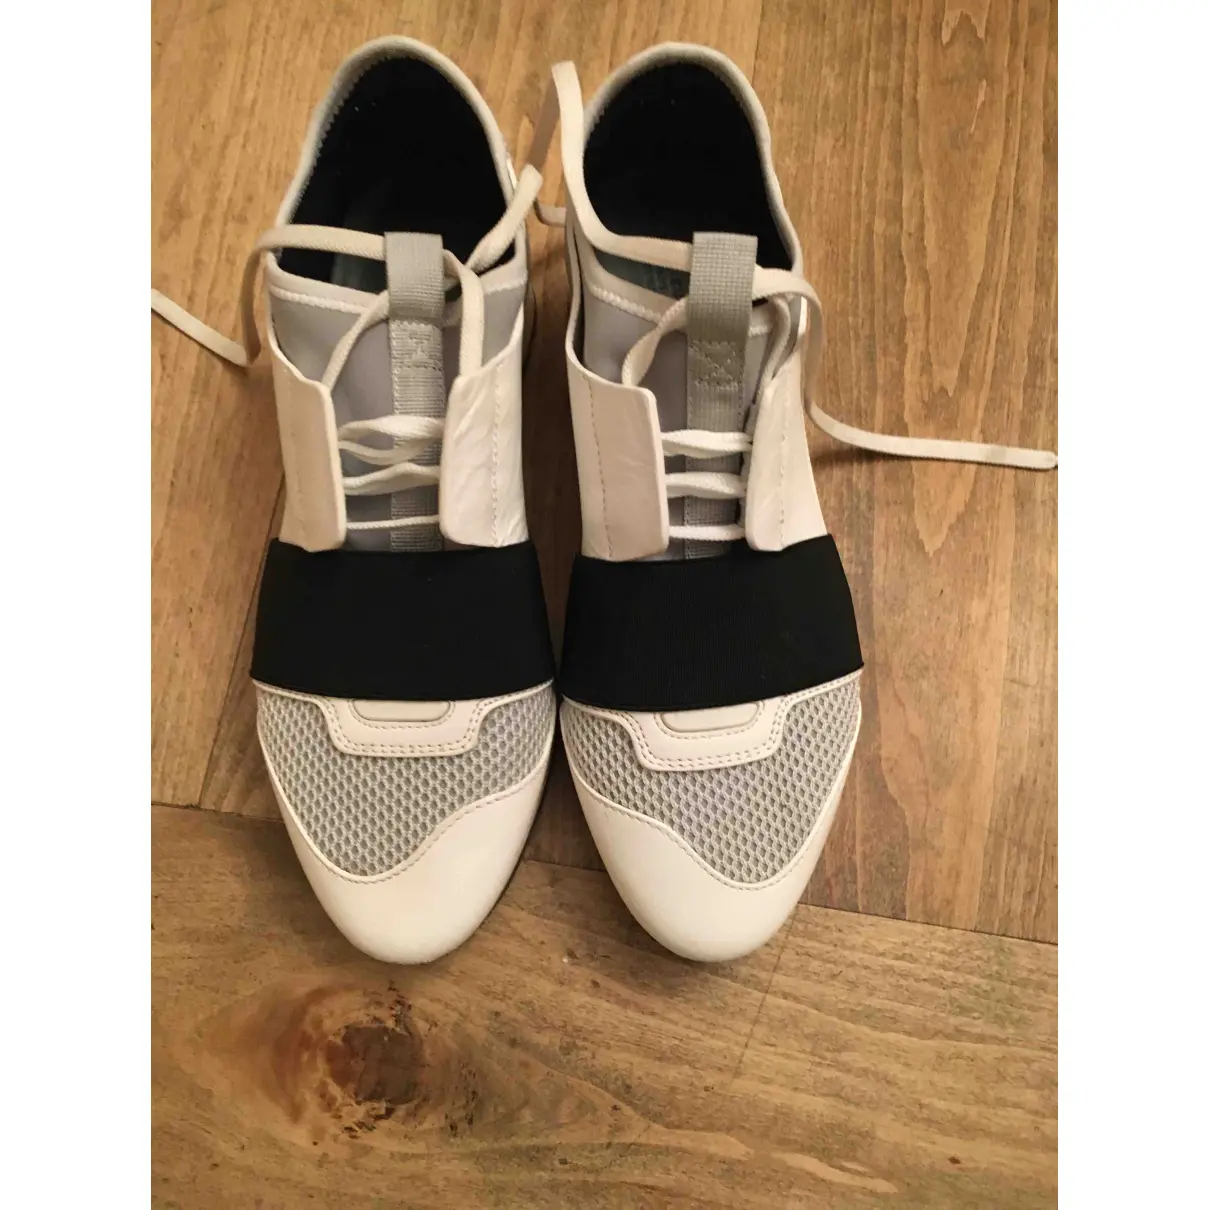 Buy Balenciaga Race leather trainers online